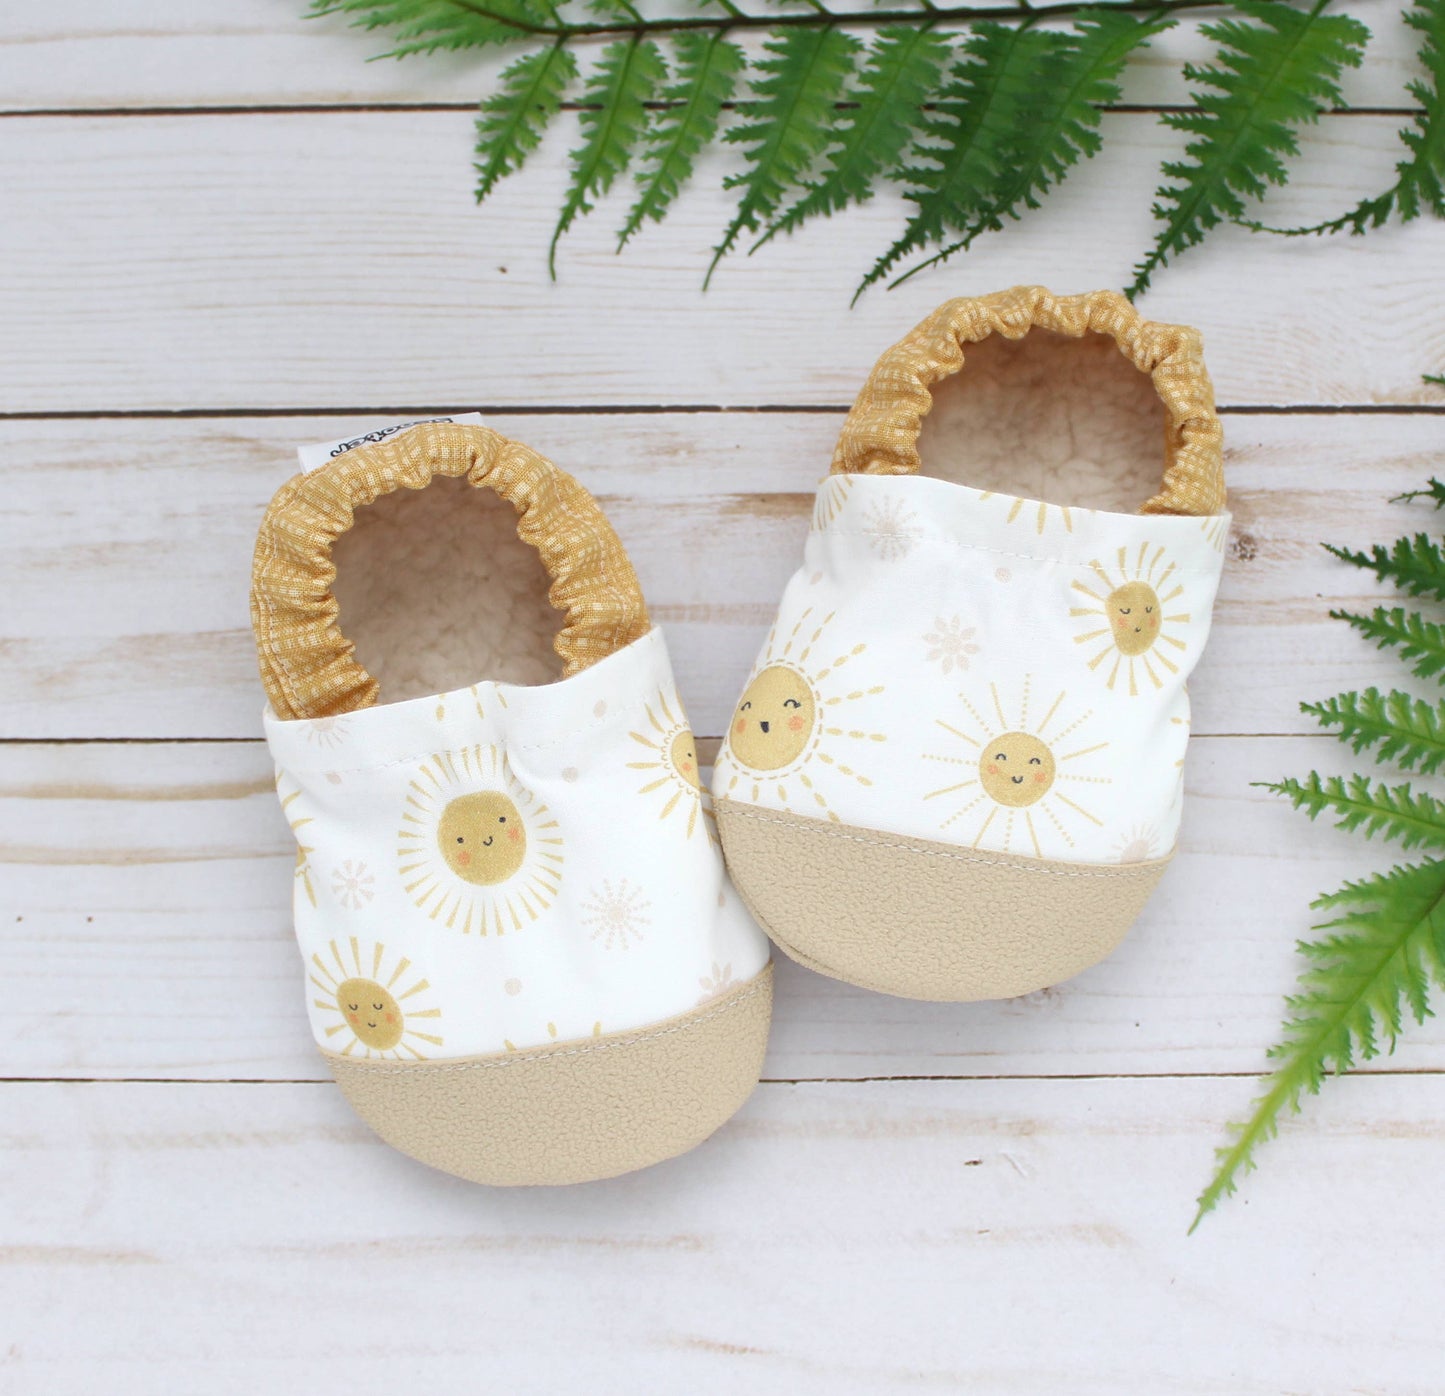 Scooter Booties - Sunshine Baby Shoes: 18 - 24 months